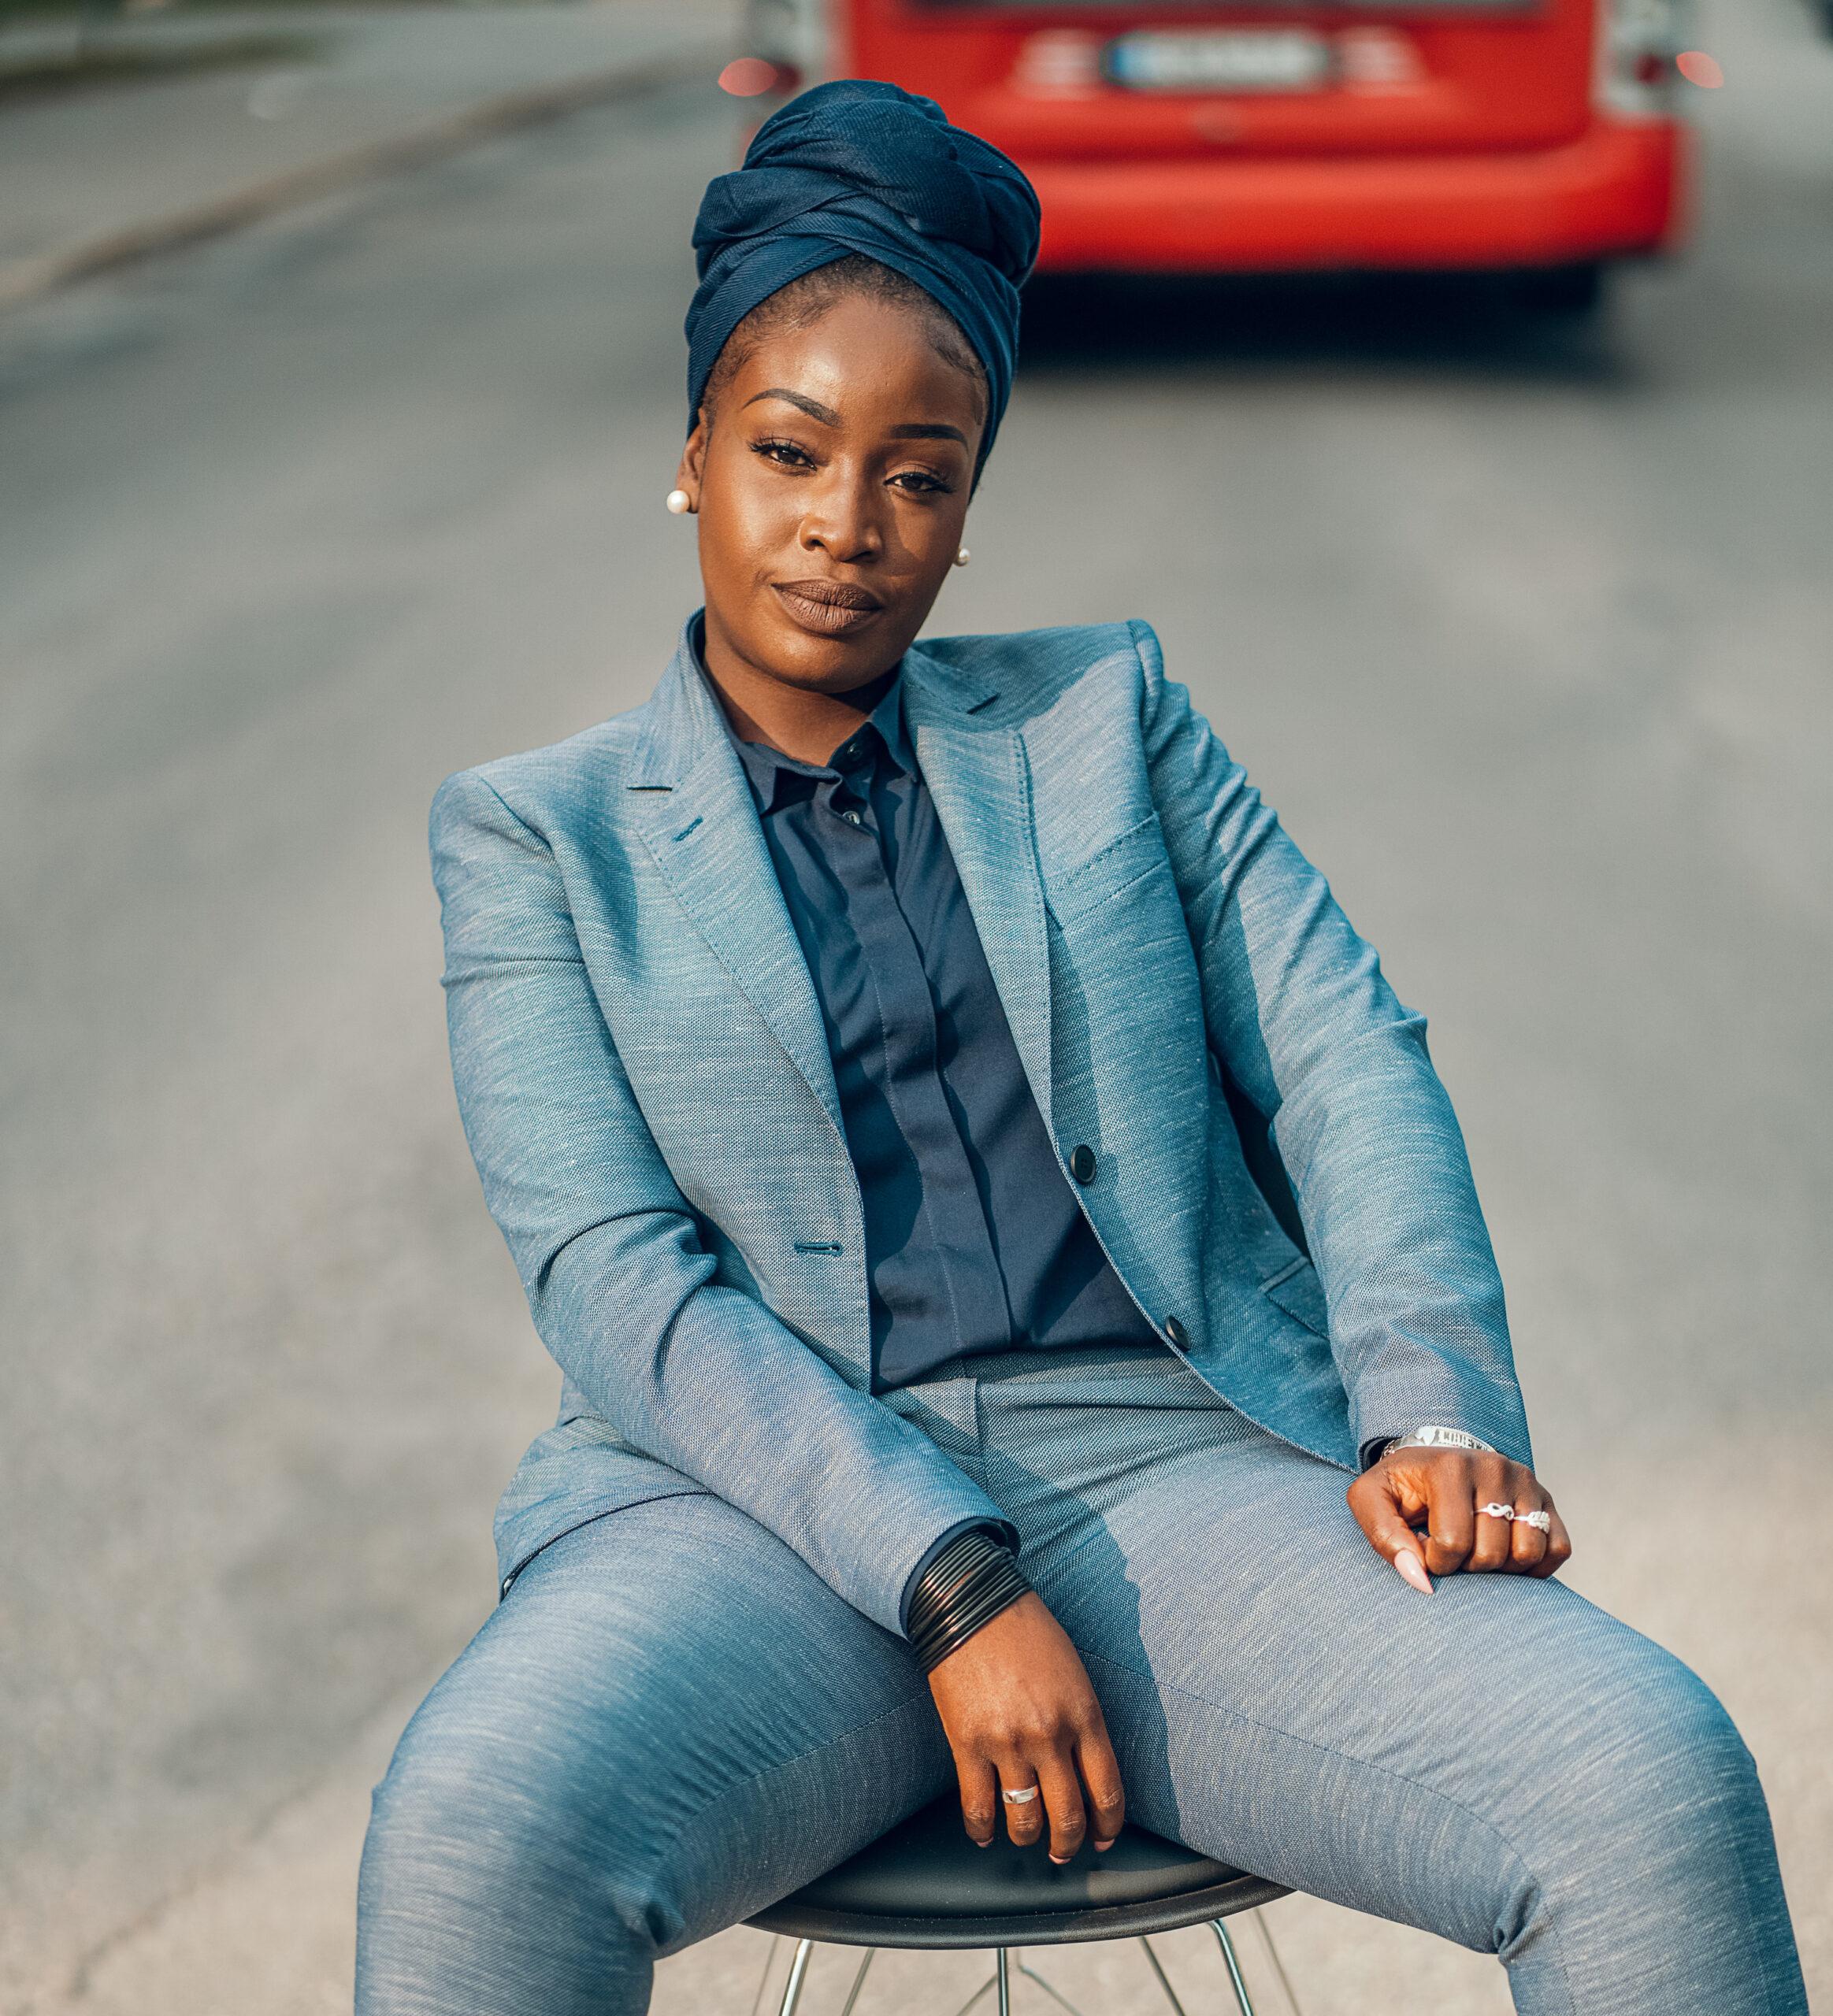 Portrait of Lovette Jallow in a blue suit and a scarf on her head sitting down looking straight into the camera.